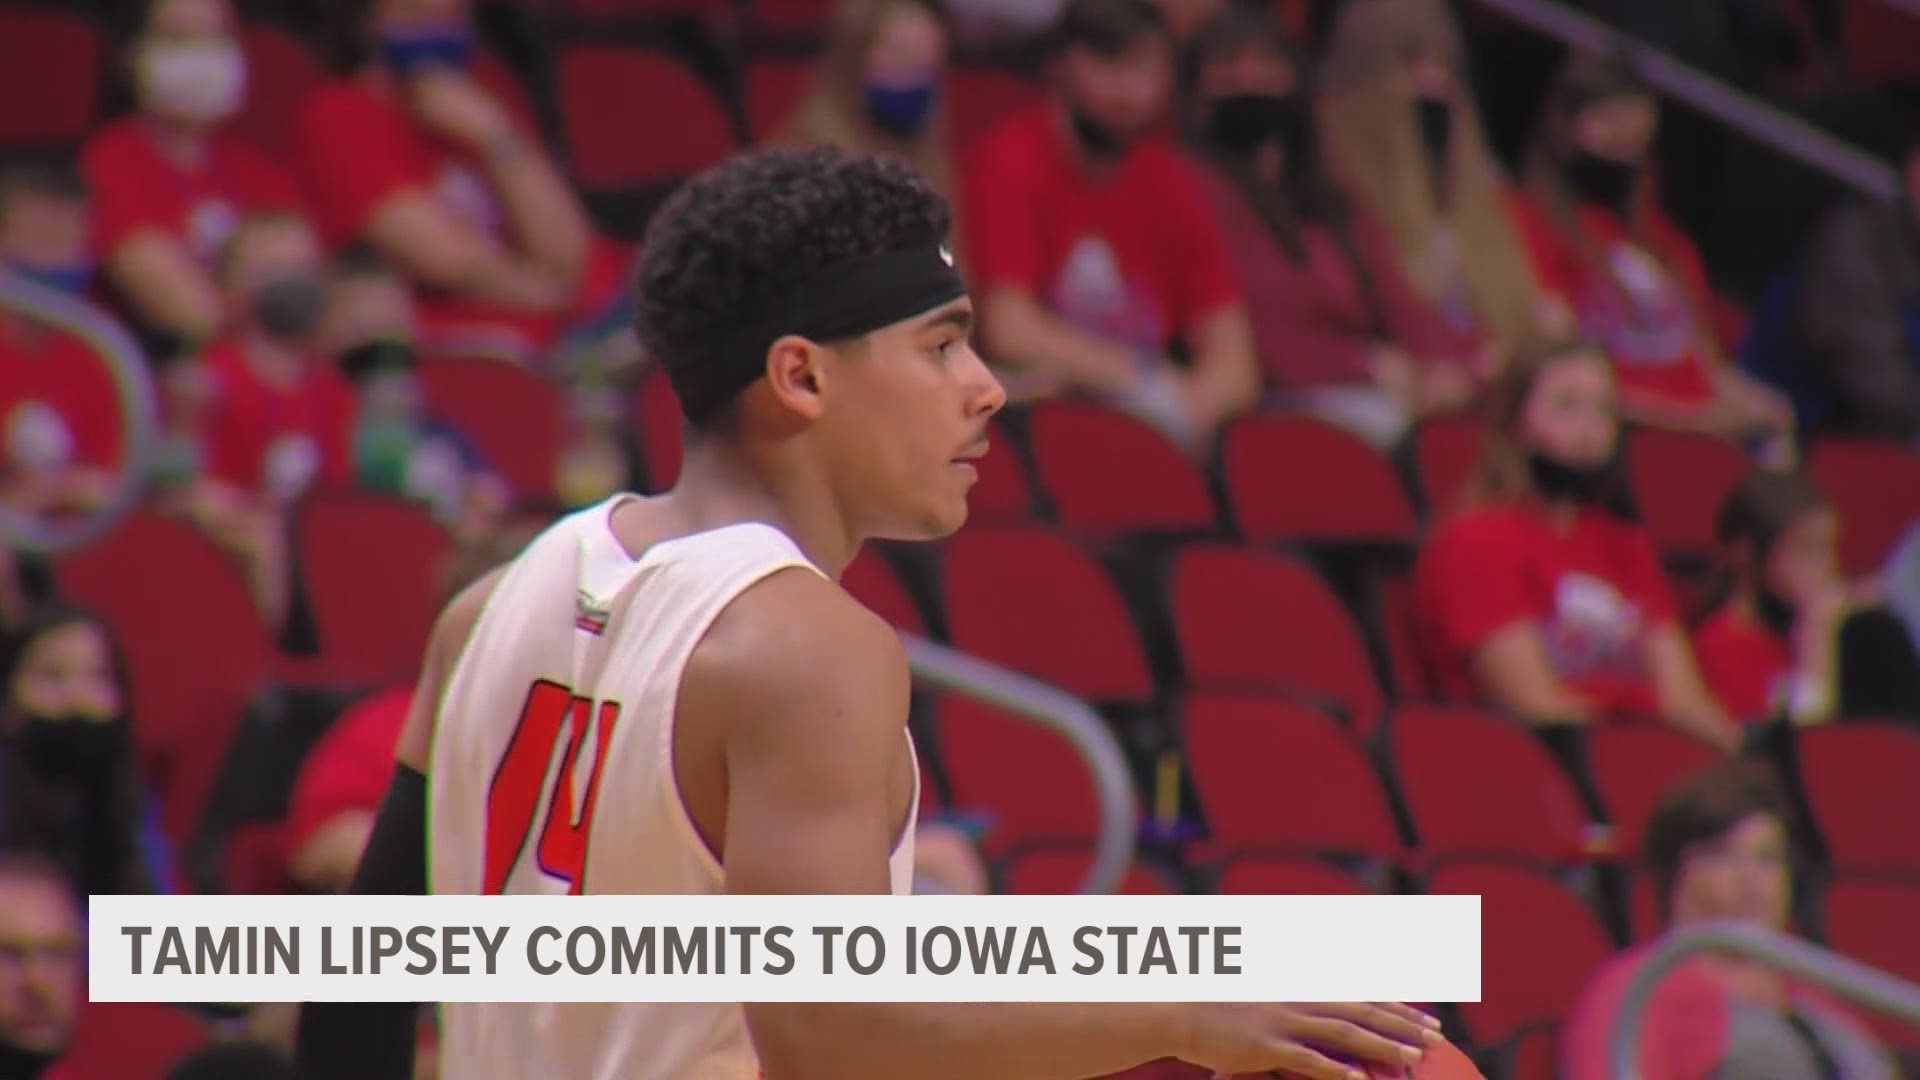 Tamin Lipsey was a top priority for Iowa State Men's Basketball in the Class of 2022. He announced his commitment on Twitter Wednesday evening.